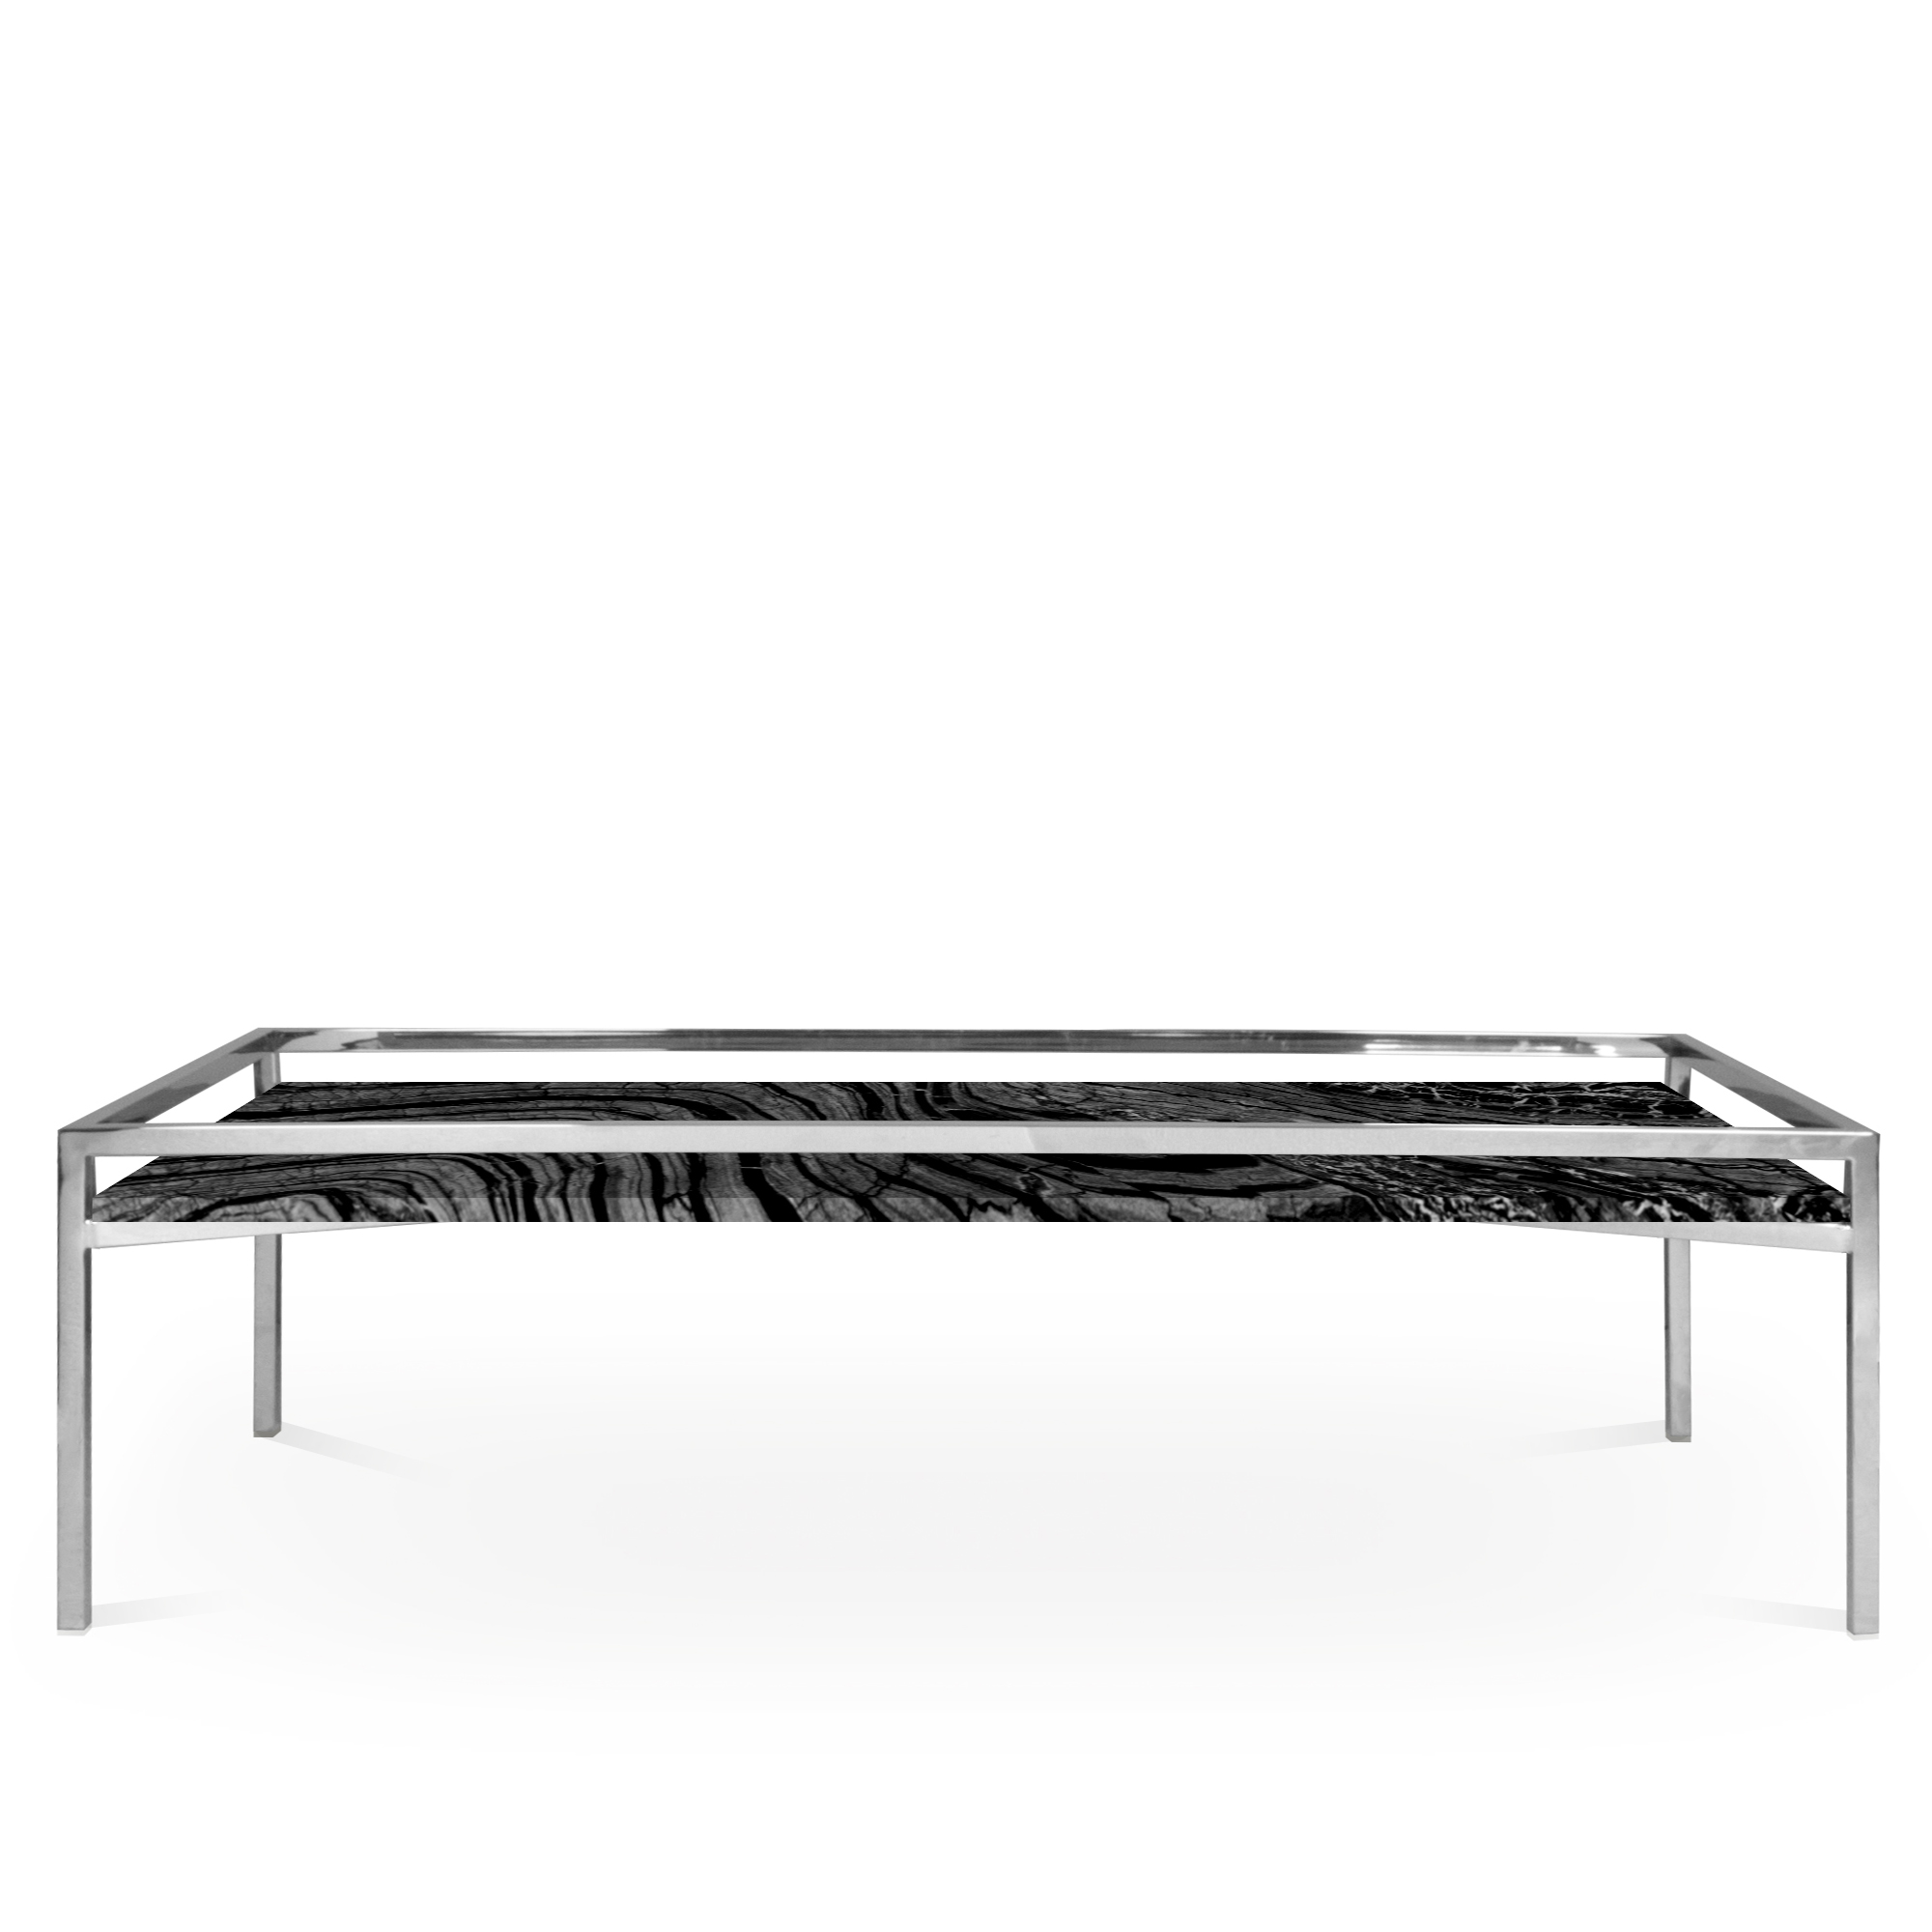 TRENTON C | Decasa Marble Marble Dining Table